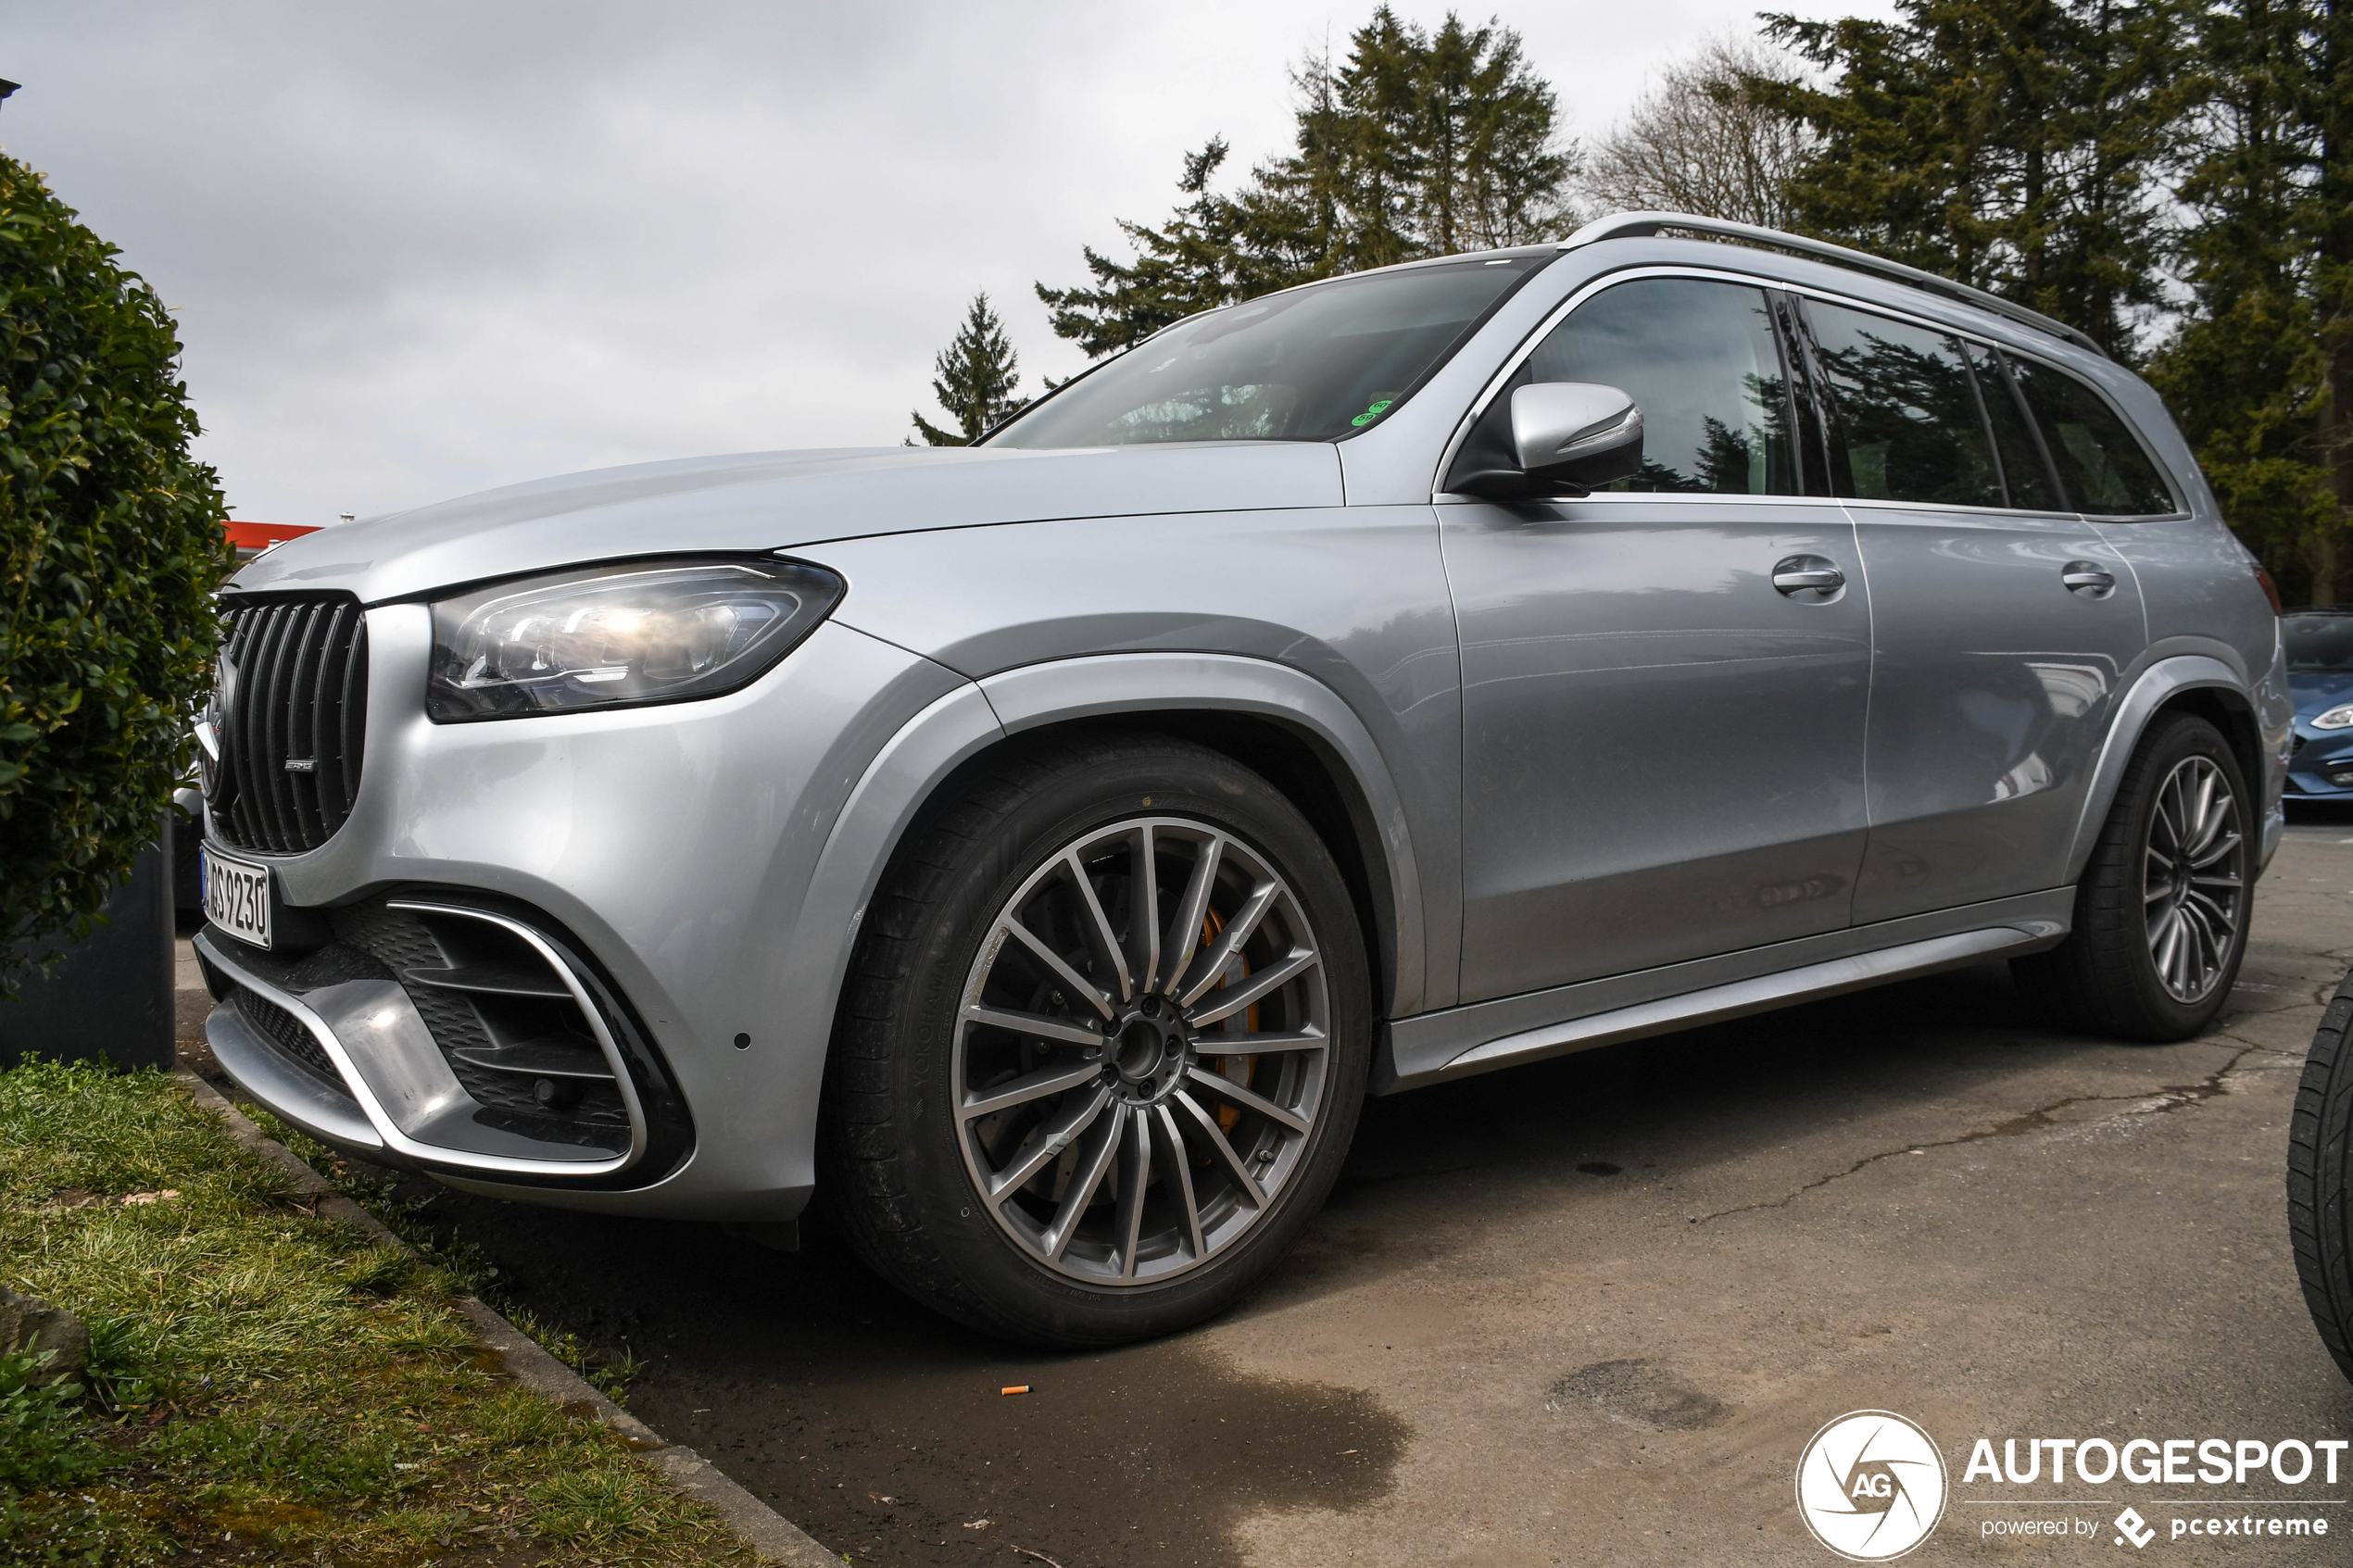 Here is the new Mercedes-AMG GLS 63 S